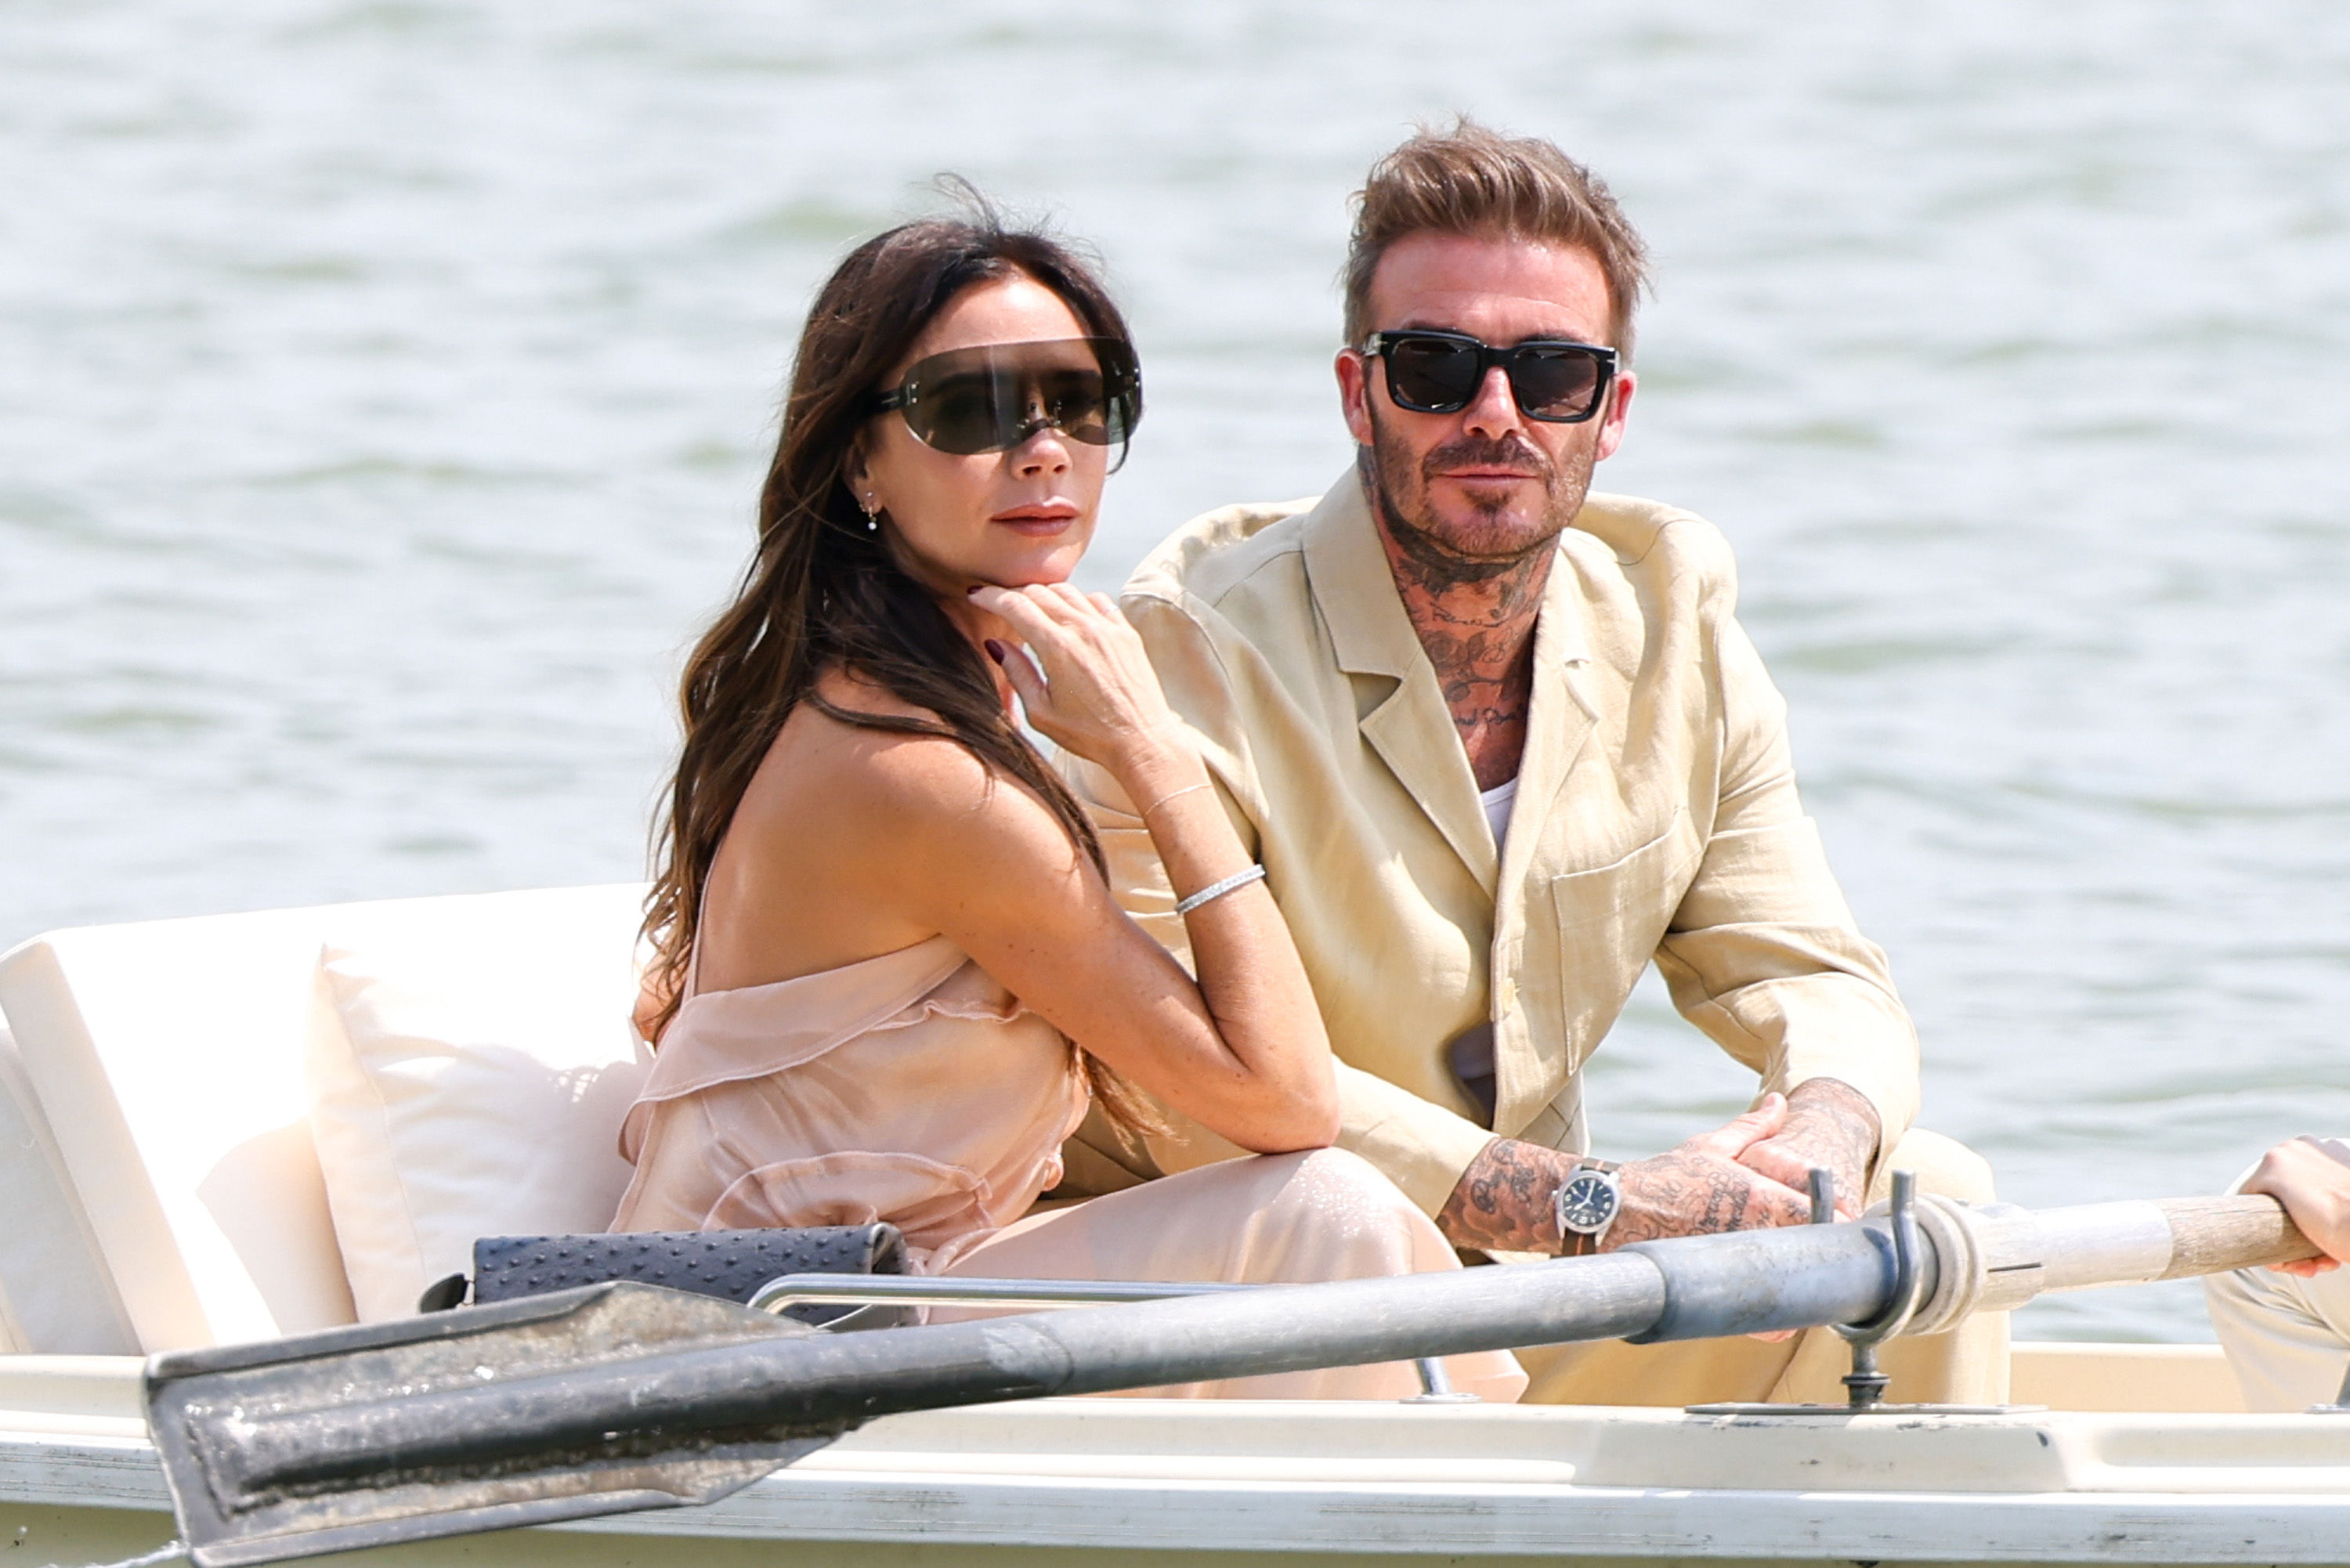 David Beckham and Victoria Beckham are seen during the "Le Chouchou" Jacquemus Fashion Show in Versailles, France on June 26, 2023 | Source: Getty Images